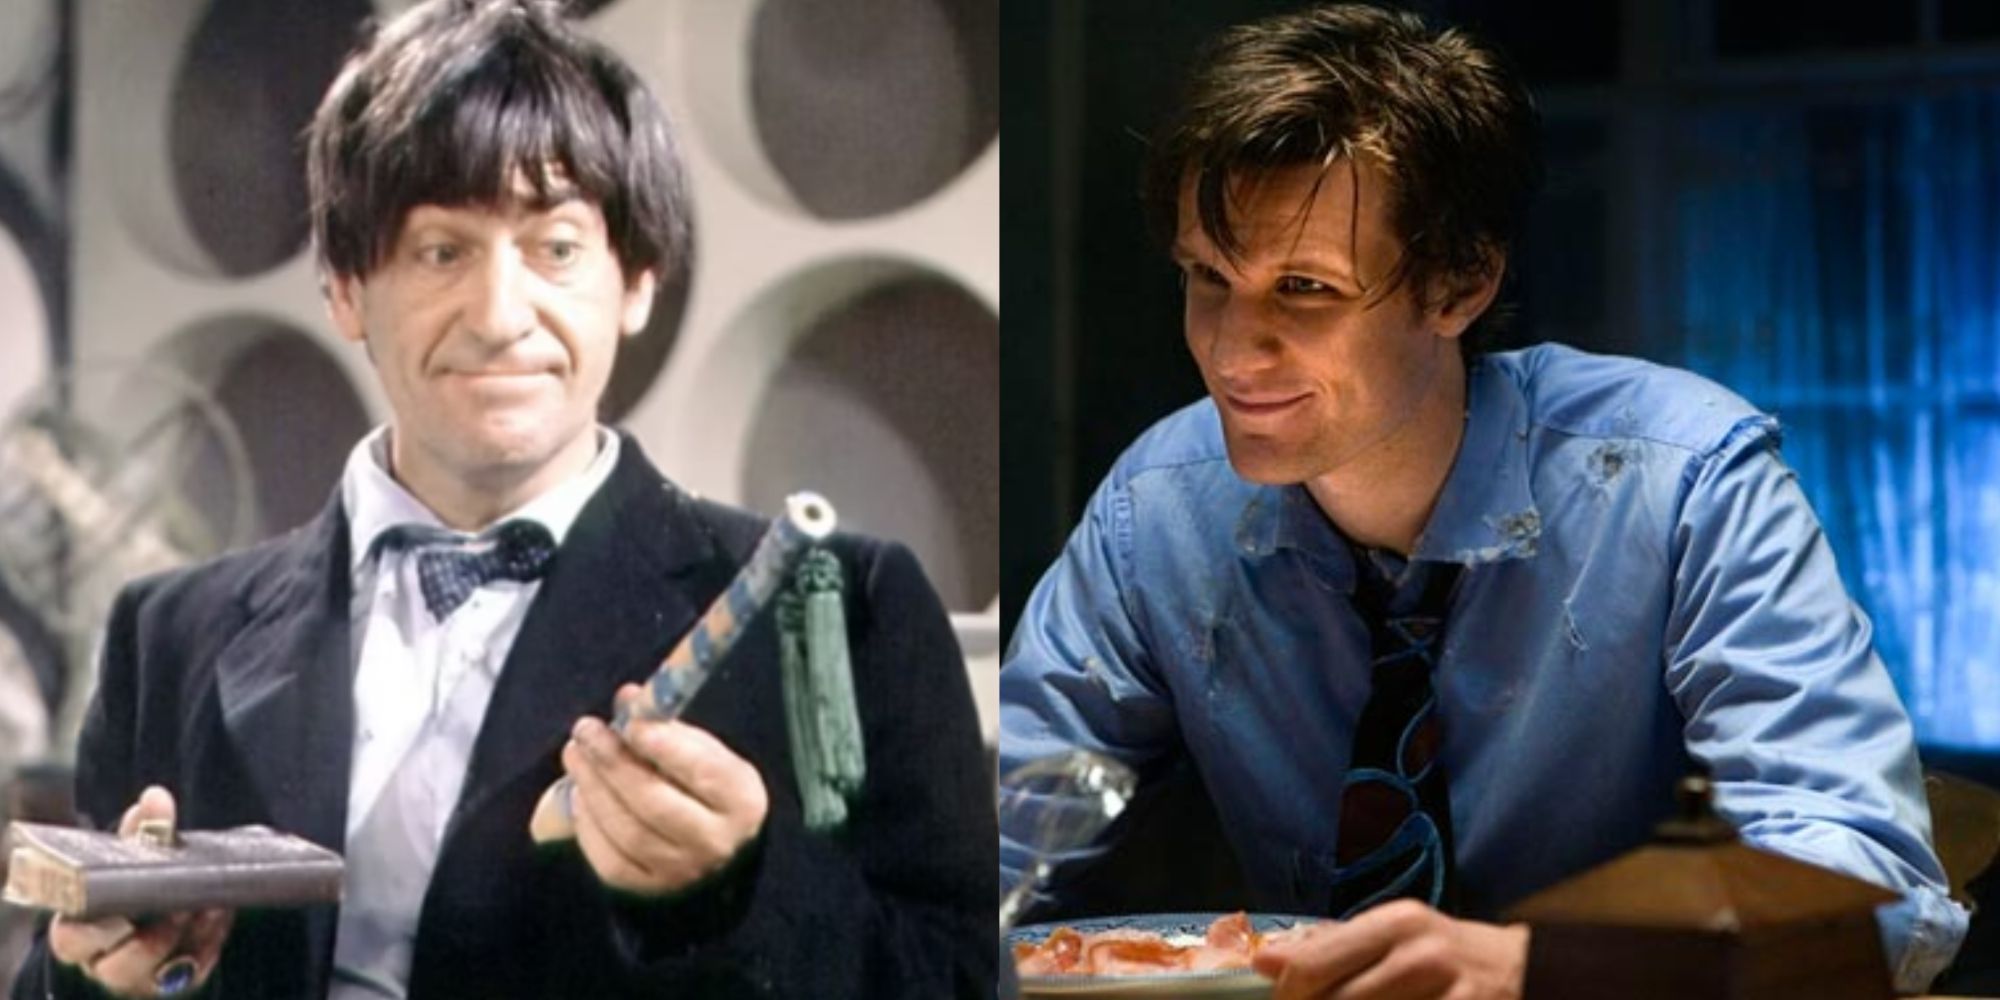 Split images of the Second Doctor holding a flute and Eleventh Doctor smiling in Doctor Who